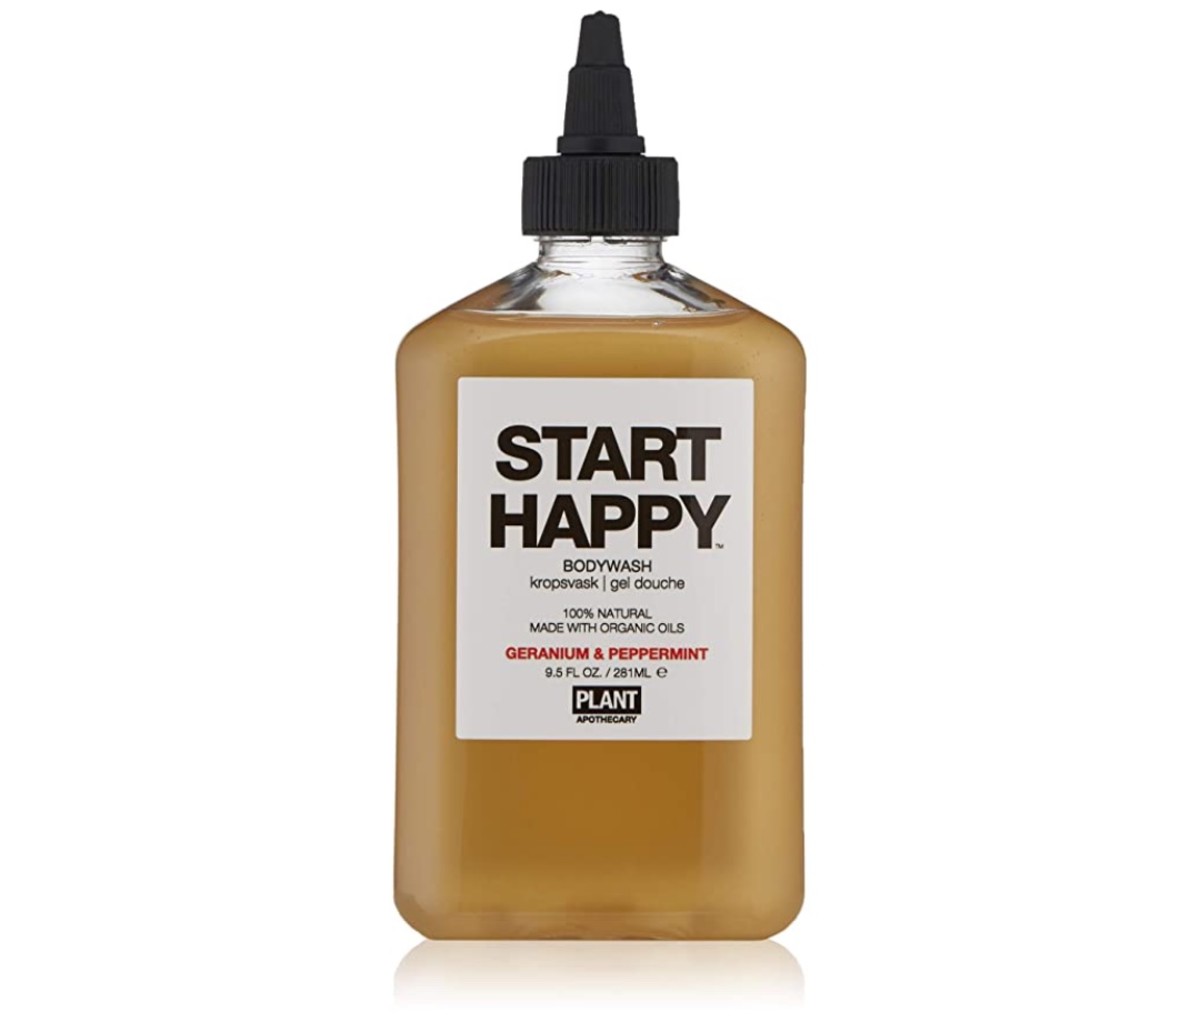 Start Happy Body Wash by Plant Apothecary